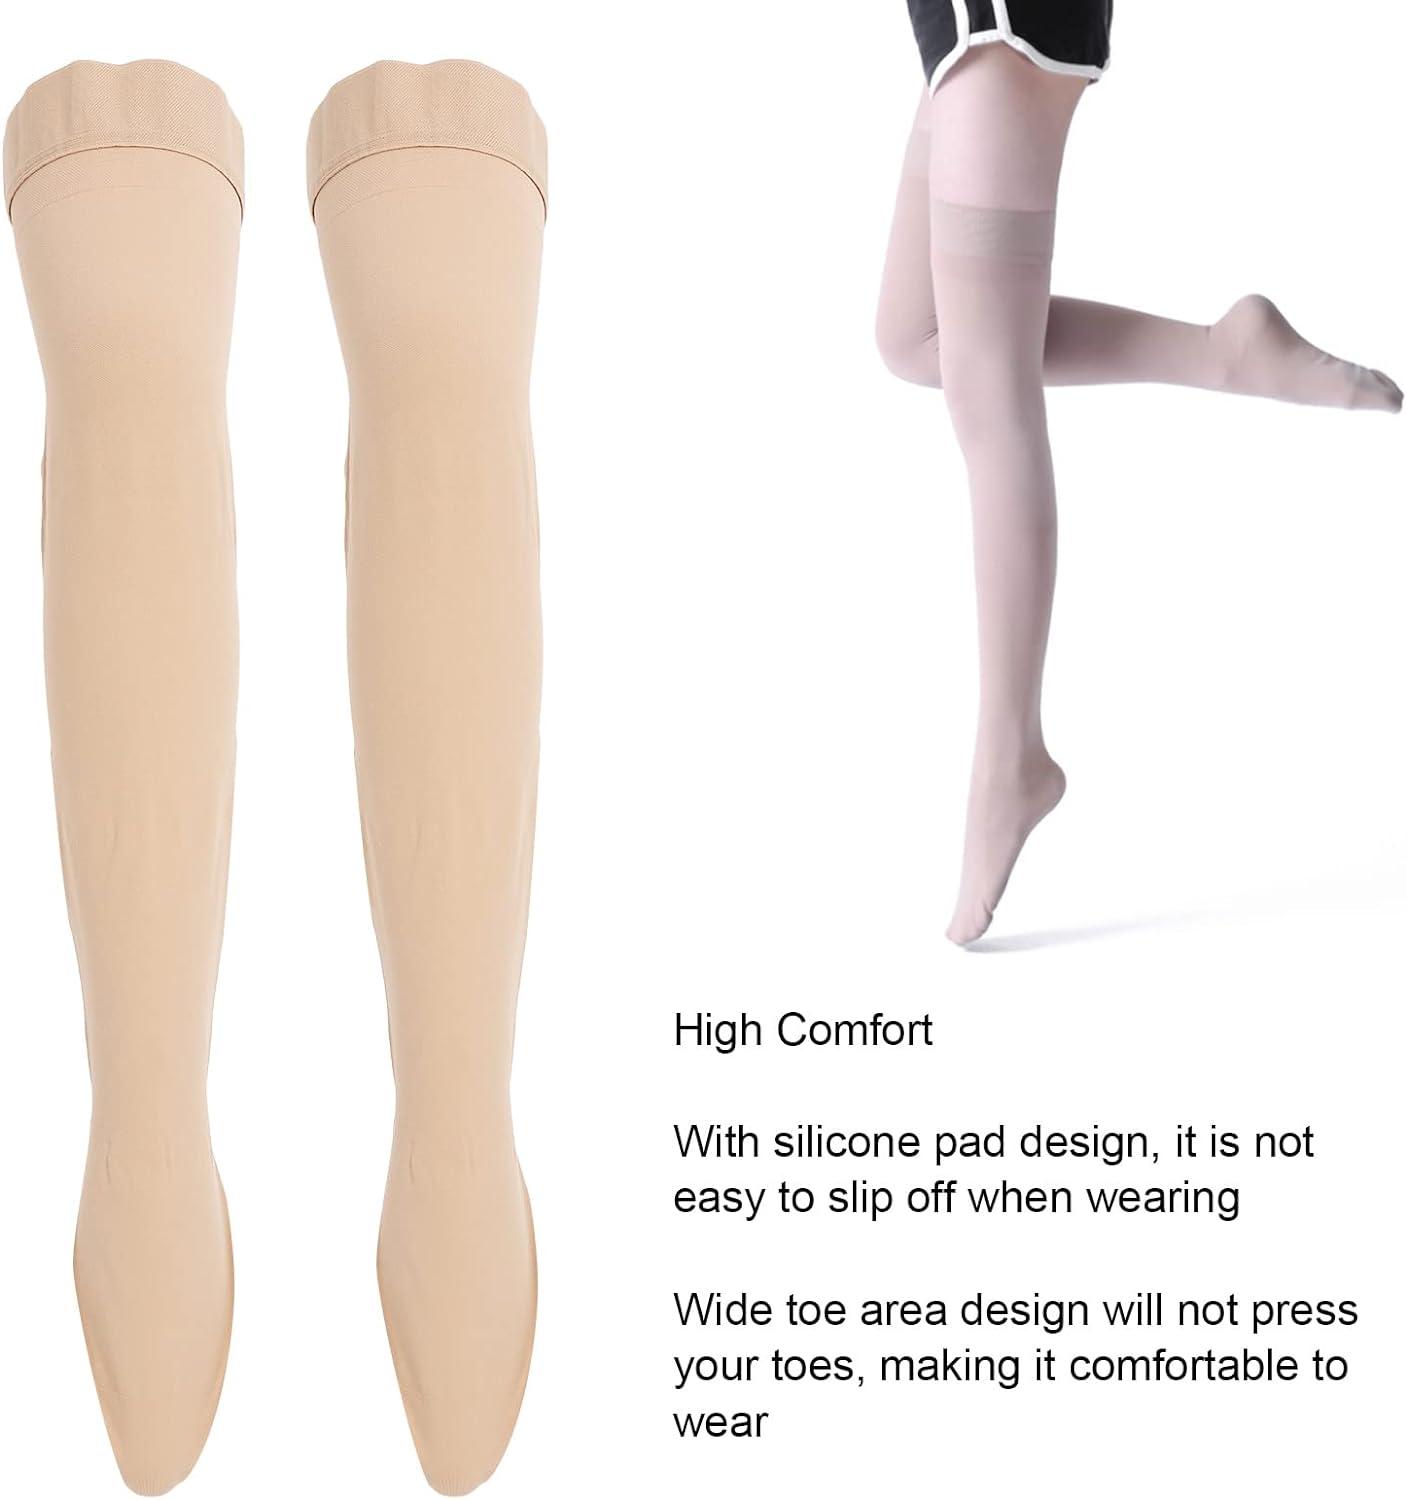 The Easy On Closed Toe Compression Socks